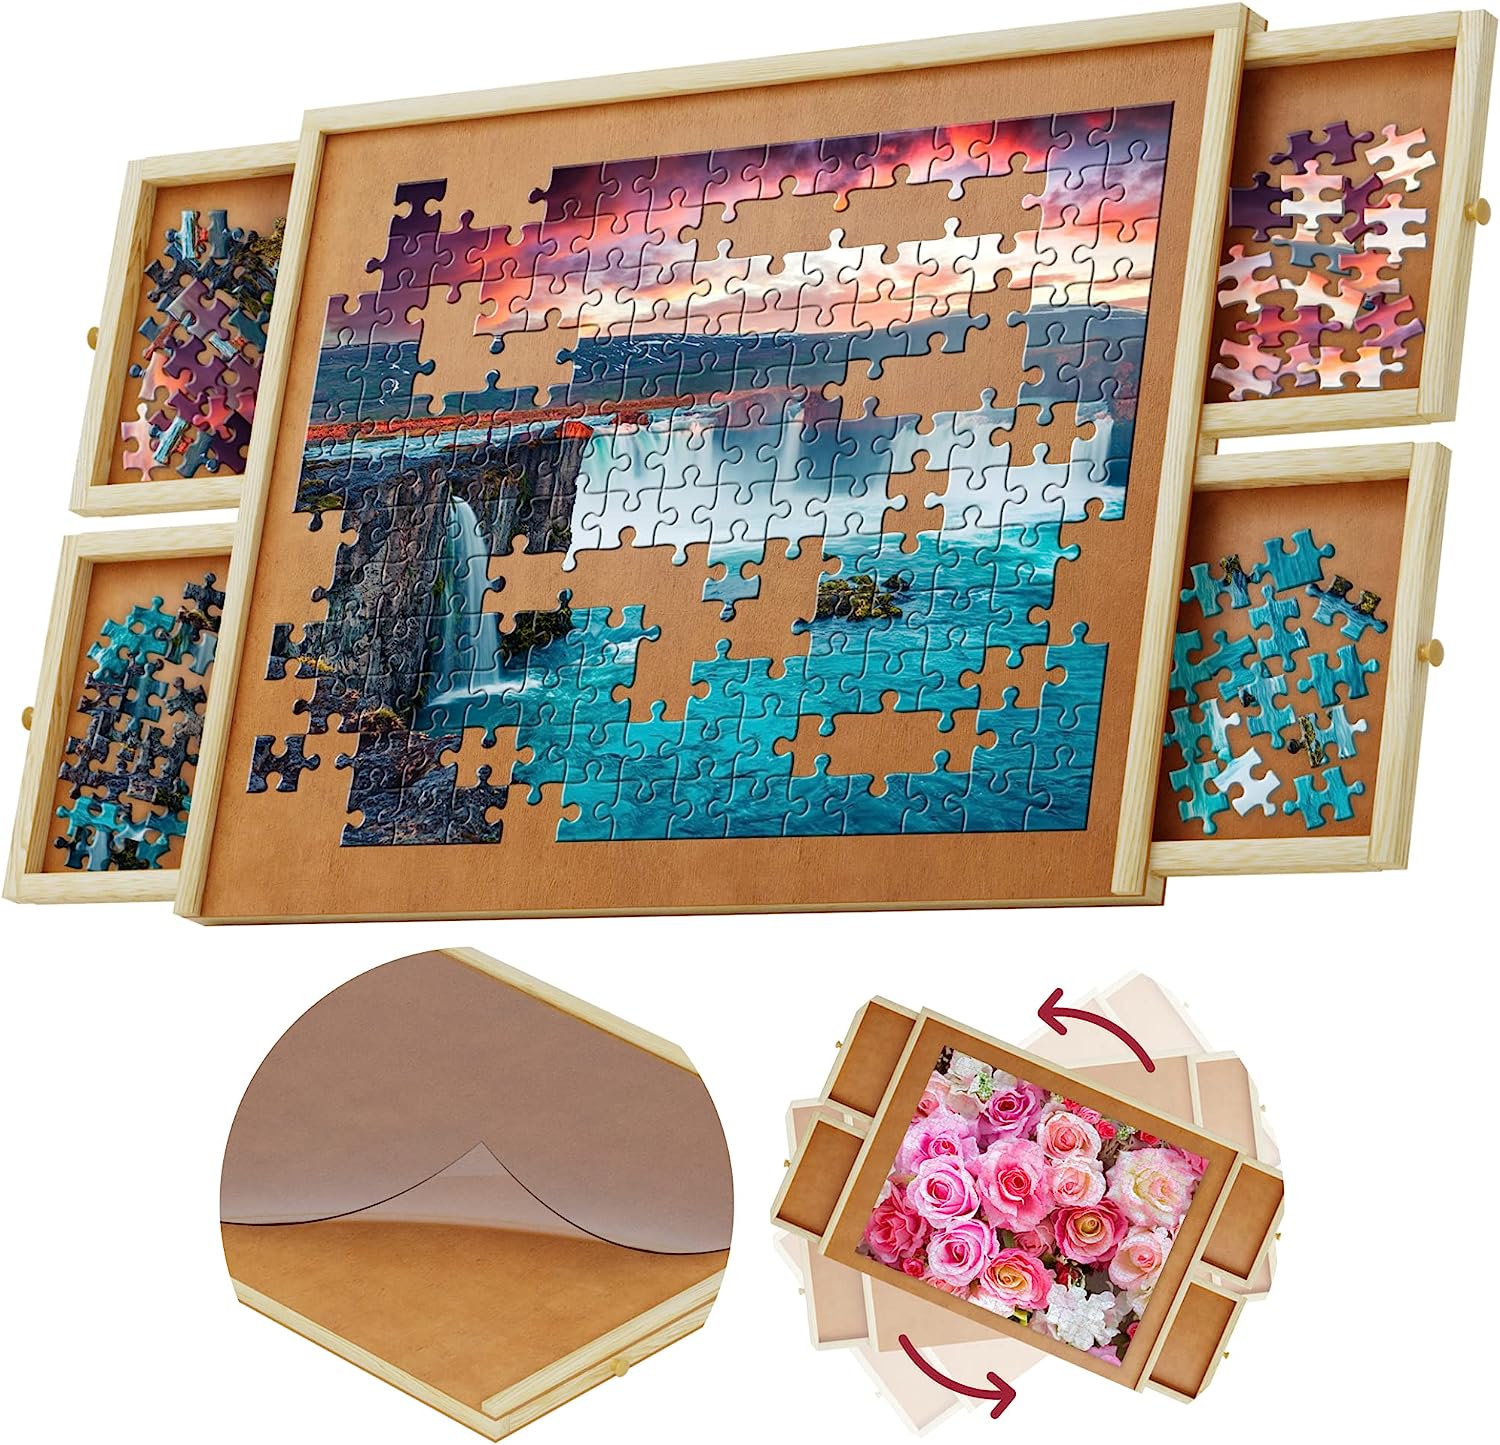 Bits and Pieces - 1000 Piece Puzzle Caddy-Porta-Puzzle Jigsaw Caddy - Puzzle Accessory Puzzle Table